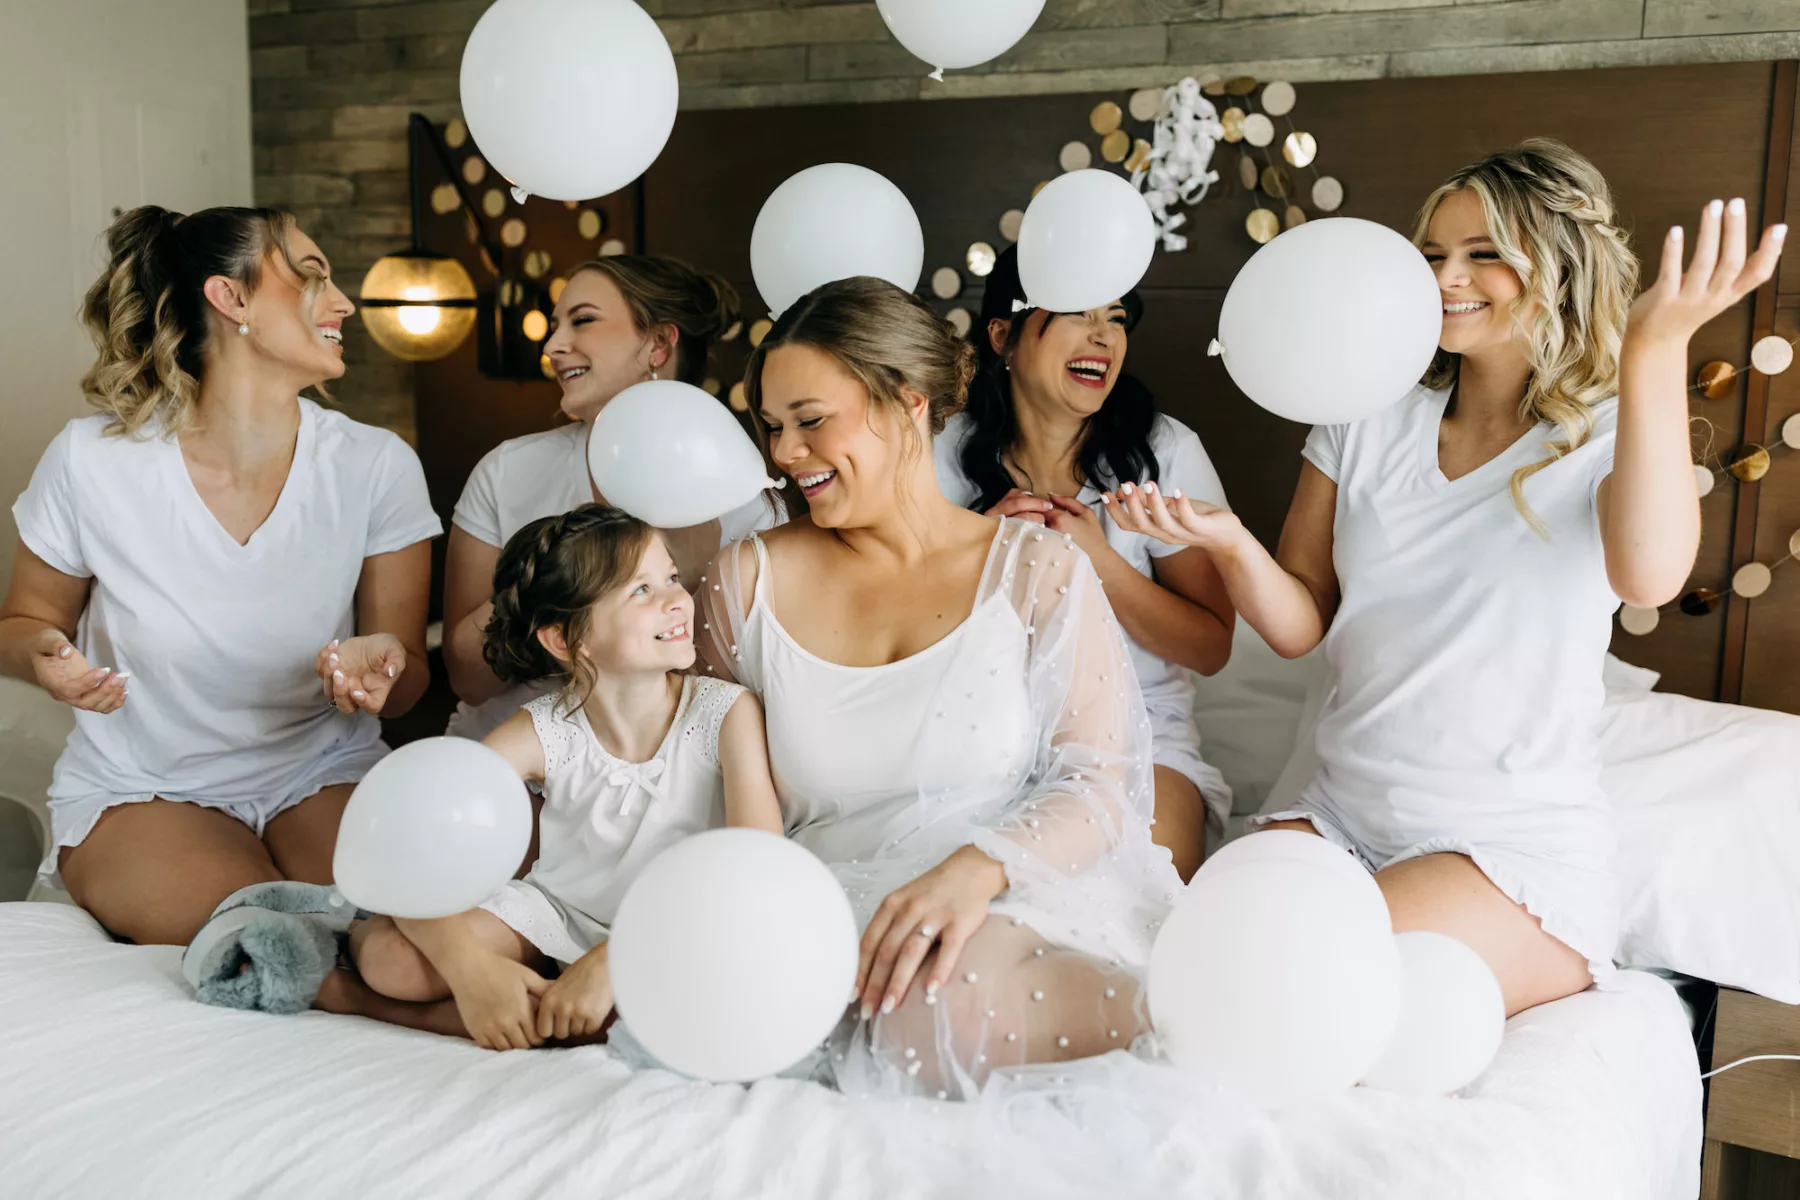 Bride and Bridesmaids Getting Ready Wedding Portrait | Tampa Bay Hair and Makeup Artist Adore Bridal